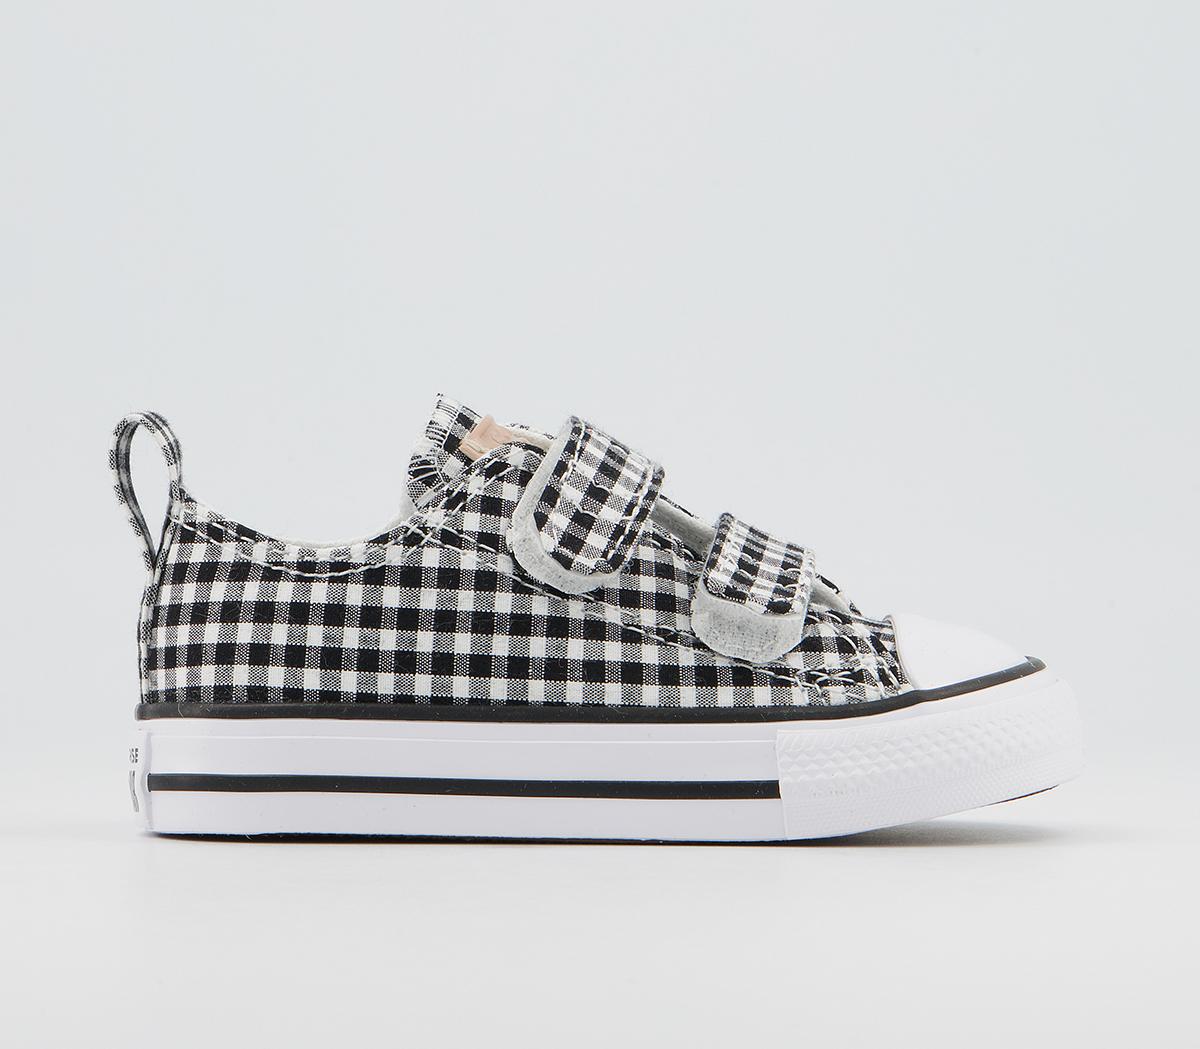 ConverseAll Star 2vlace TrainersBlack White Black Gingham